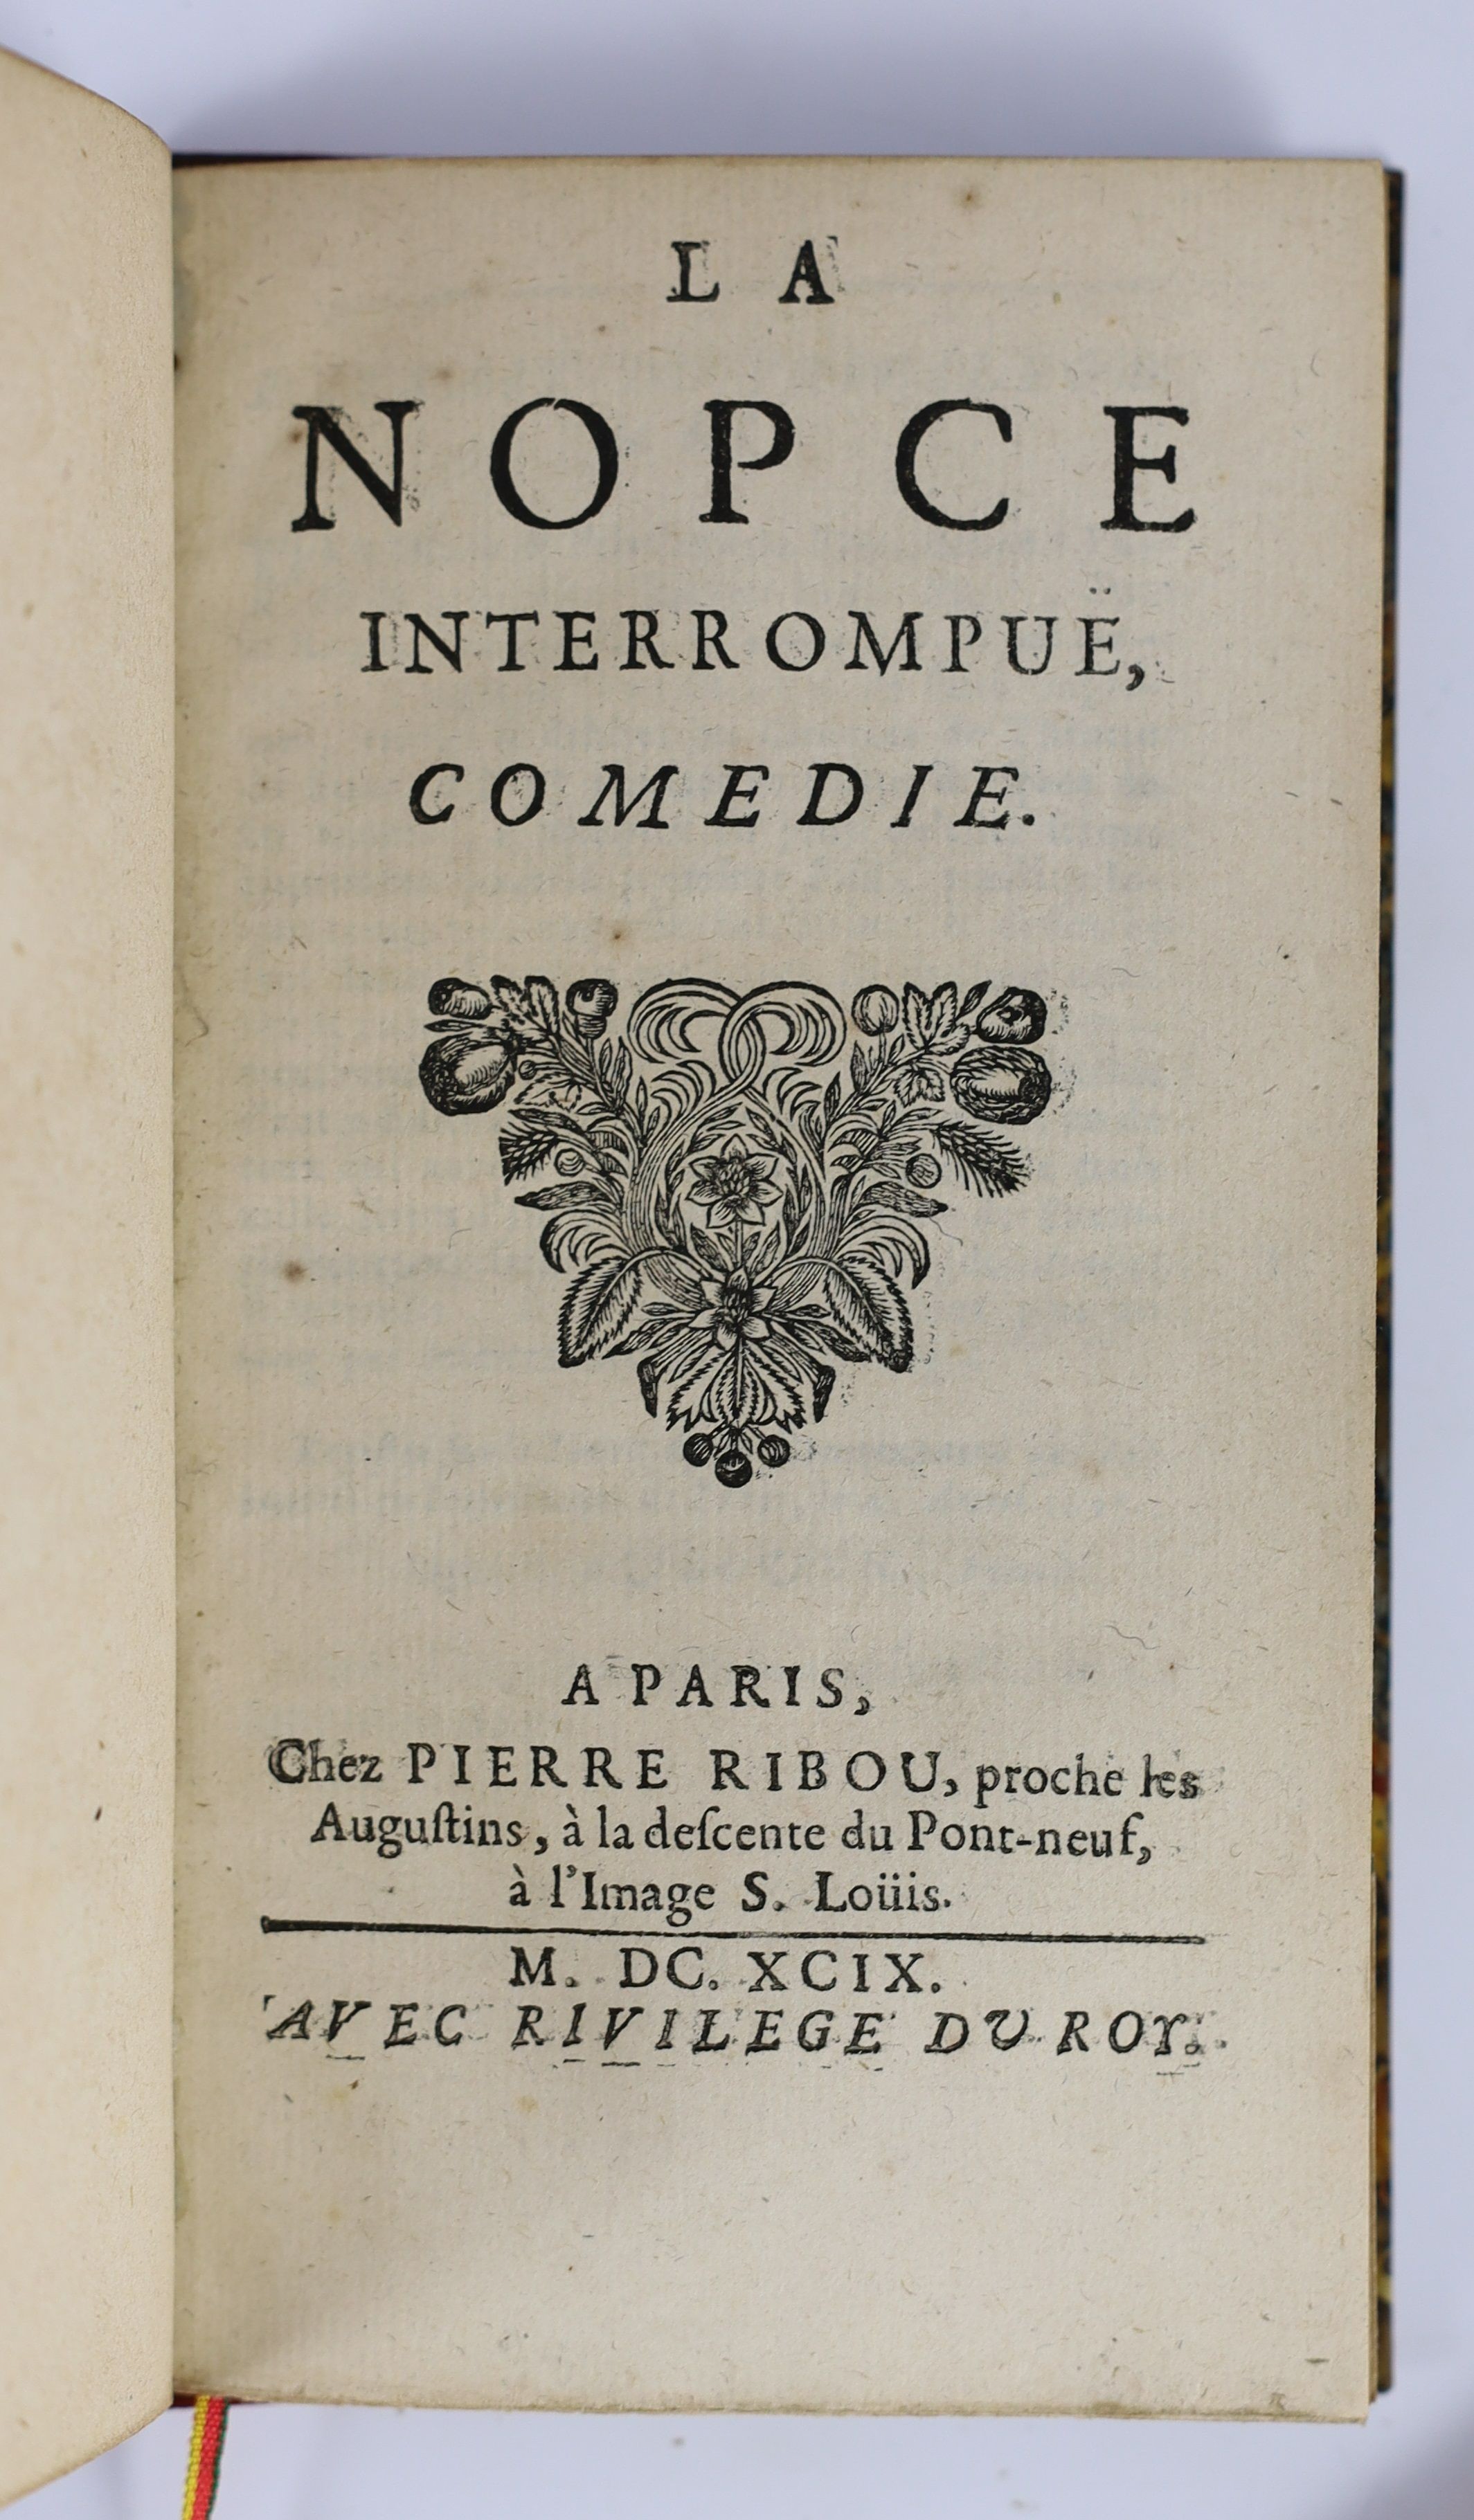 Dufresny, Charles Rivière - La Nopce Interrompue, Comedie, 12mo, quarter red morocco with marbled boards by Isadore Smeers, Pierre Ribou, Paris, 1699